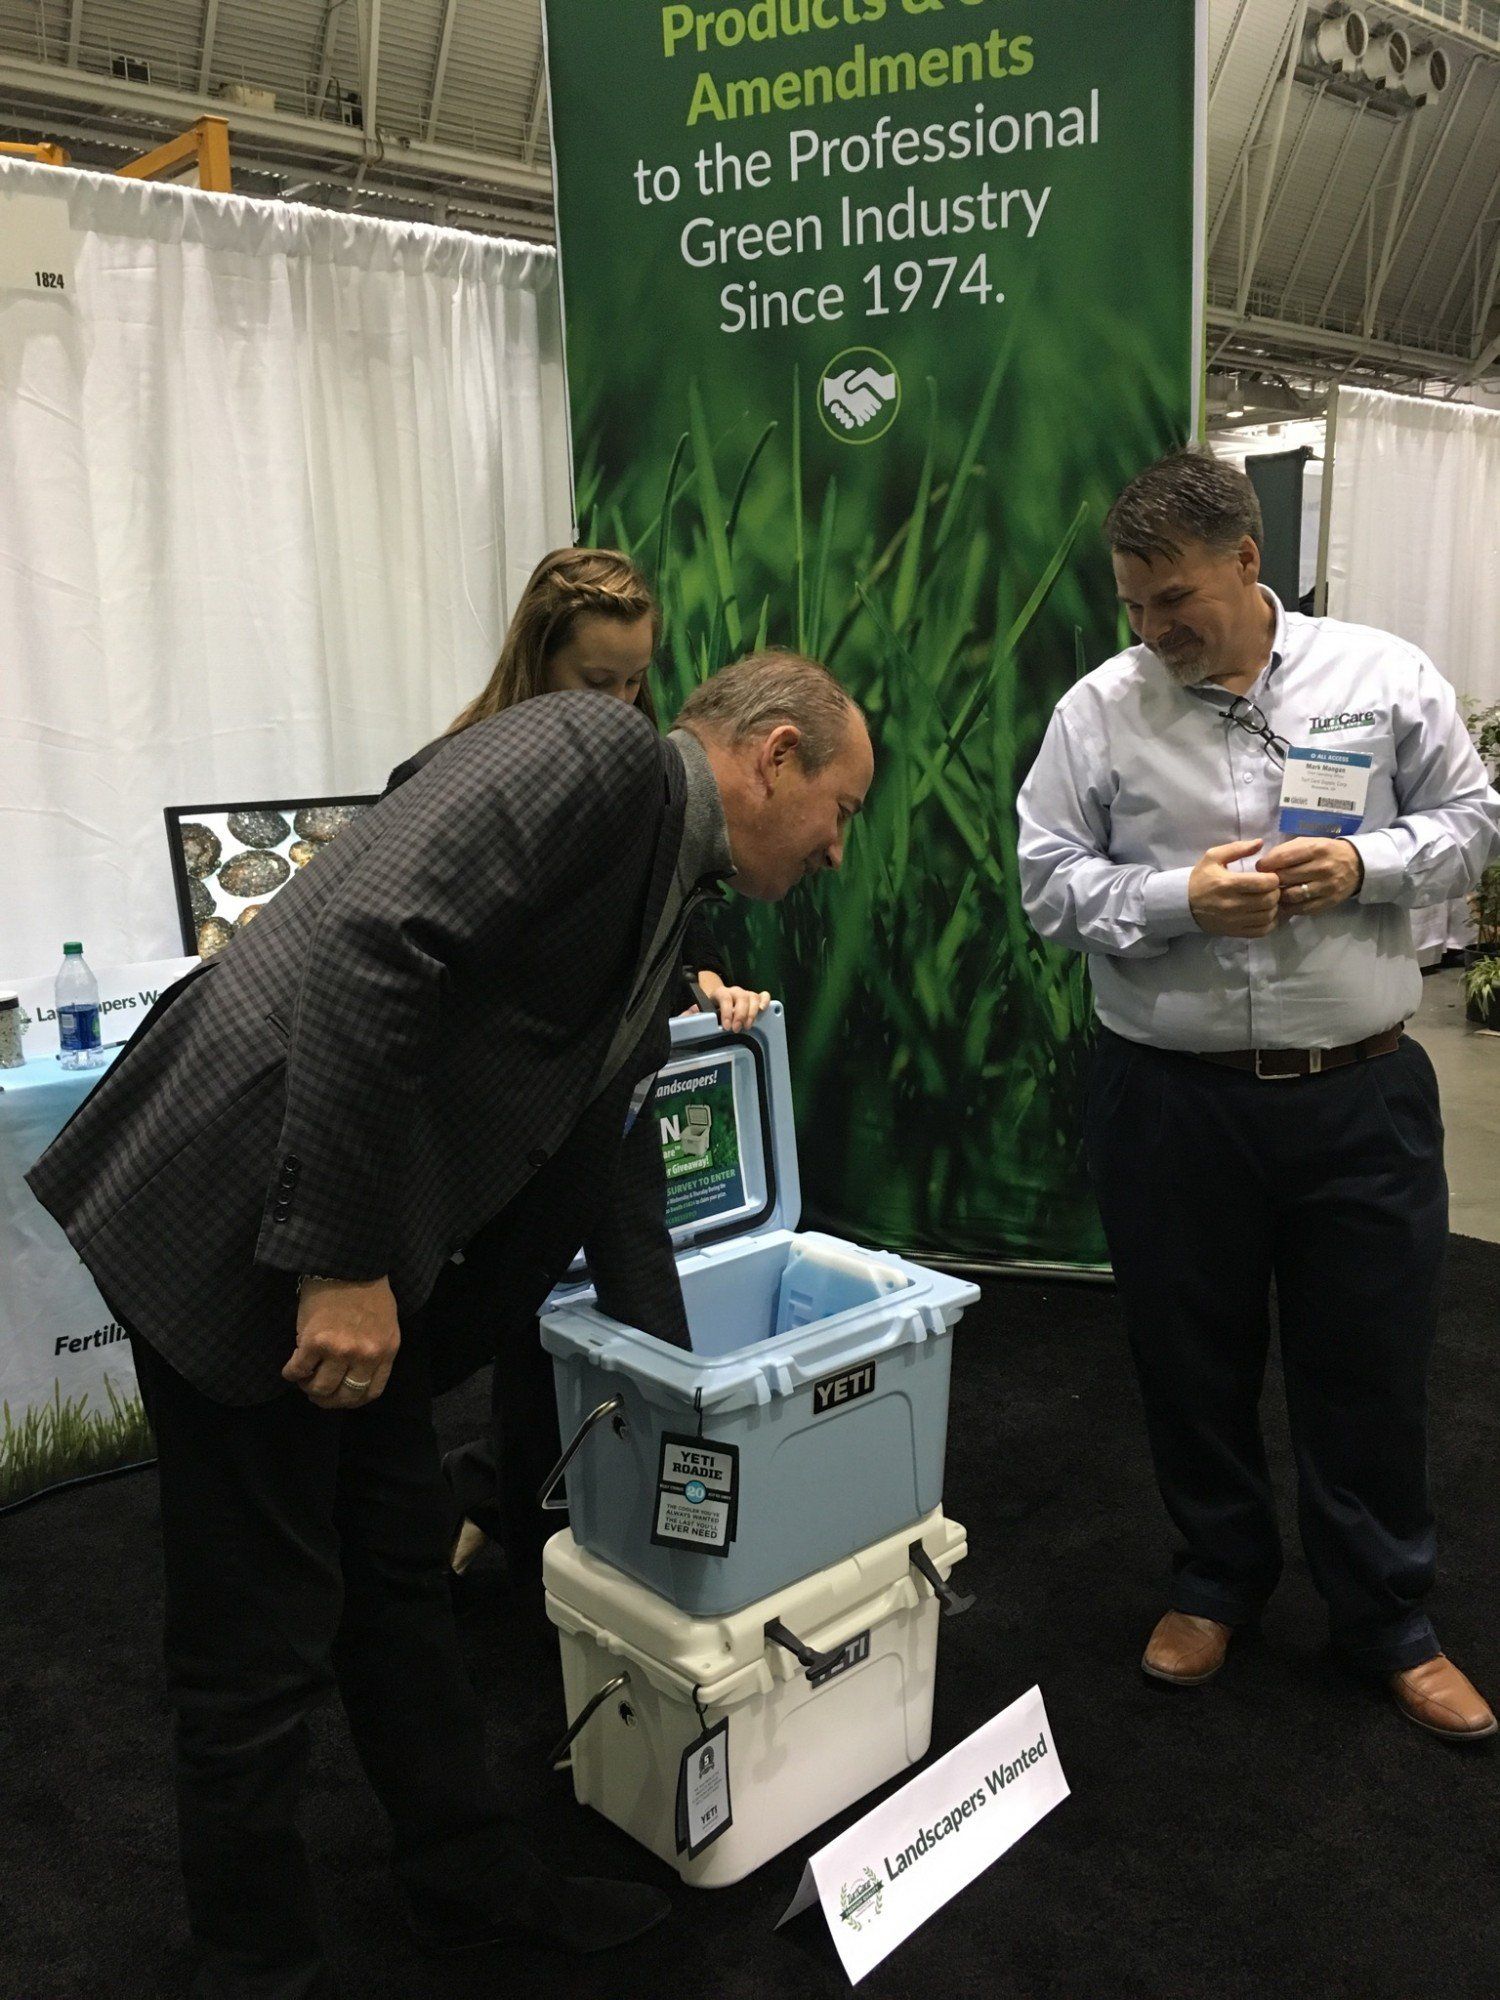 new england grows william milowitz reaching in yeti cooler for prize give away while mark mangan looks on